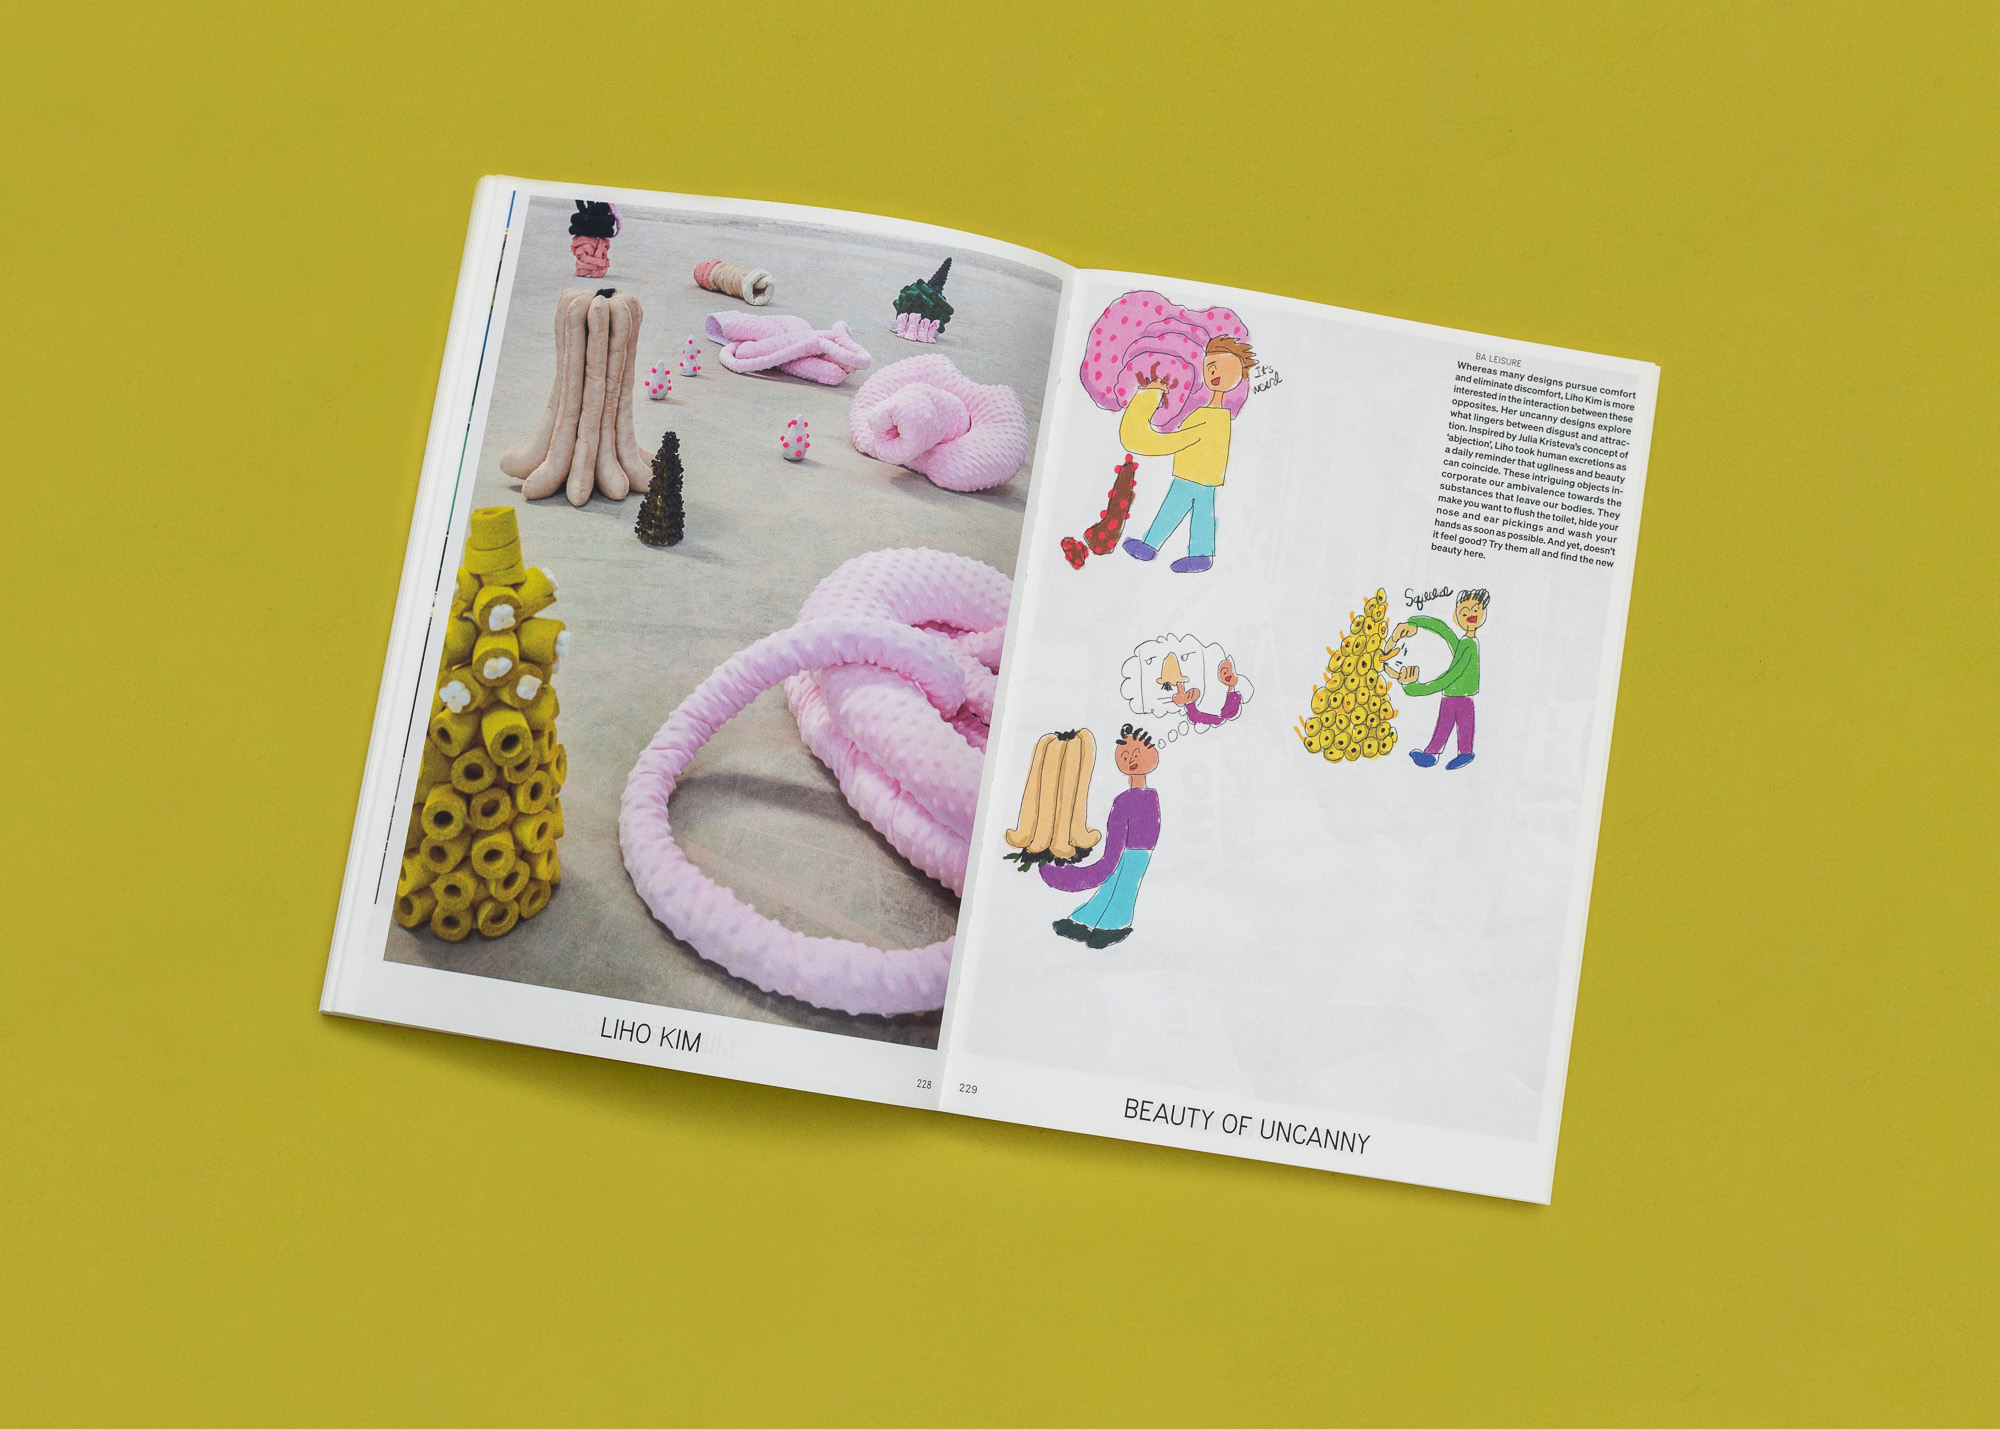 Project Page of Liho Kim in the Design Academy Graduation Catalogue 2021